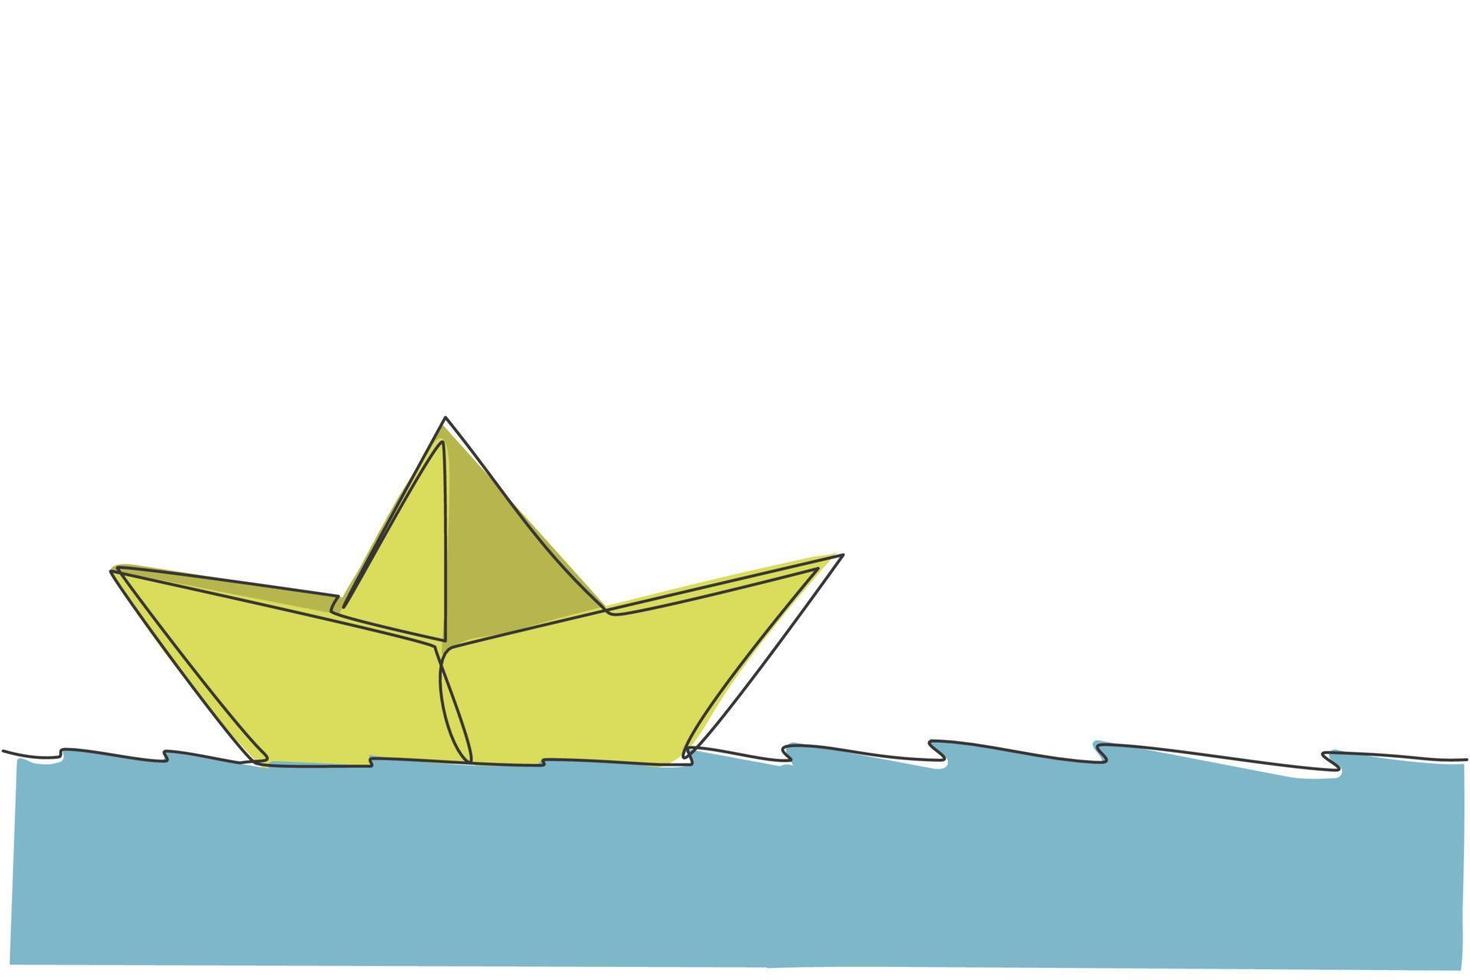 One continuous line drawing of paper boat sailing on the water river. Origami craft concept. Dynamic single line draw design vector graphic illustration